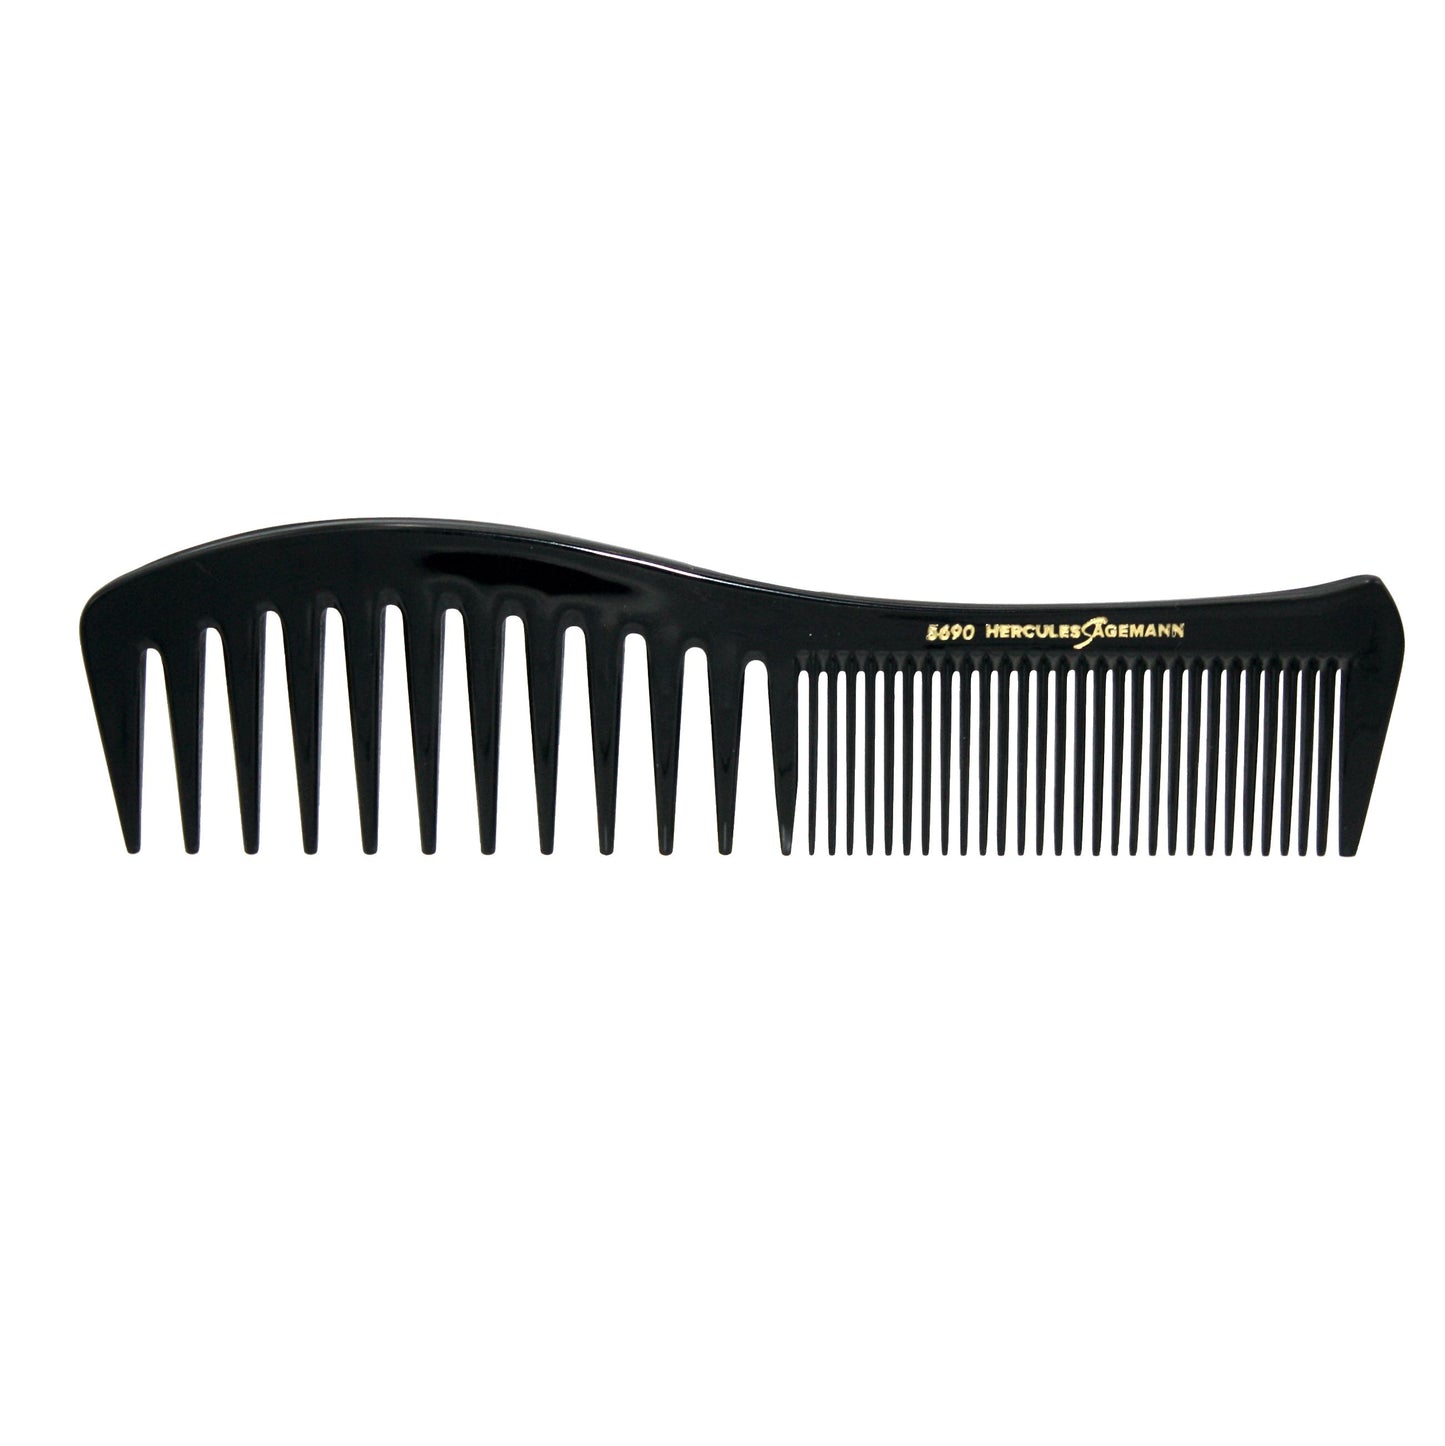 Hard Rubber, 7.75in Curved Styling Comb, Hercules Sagemann 5690